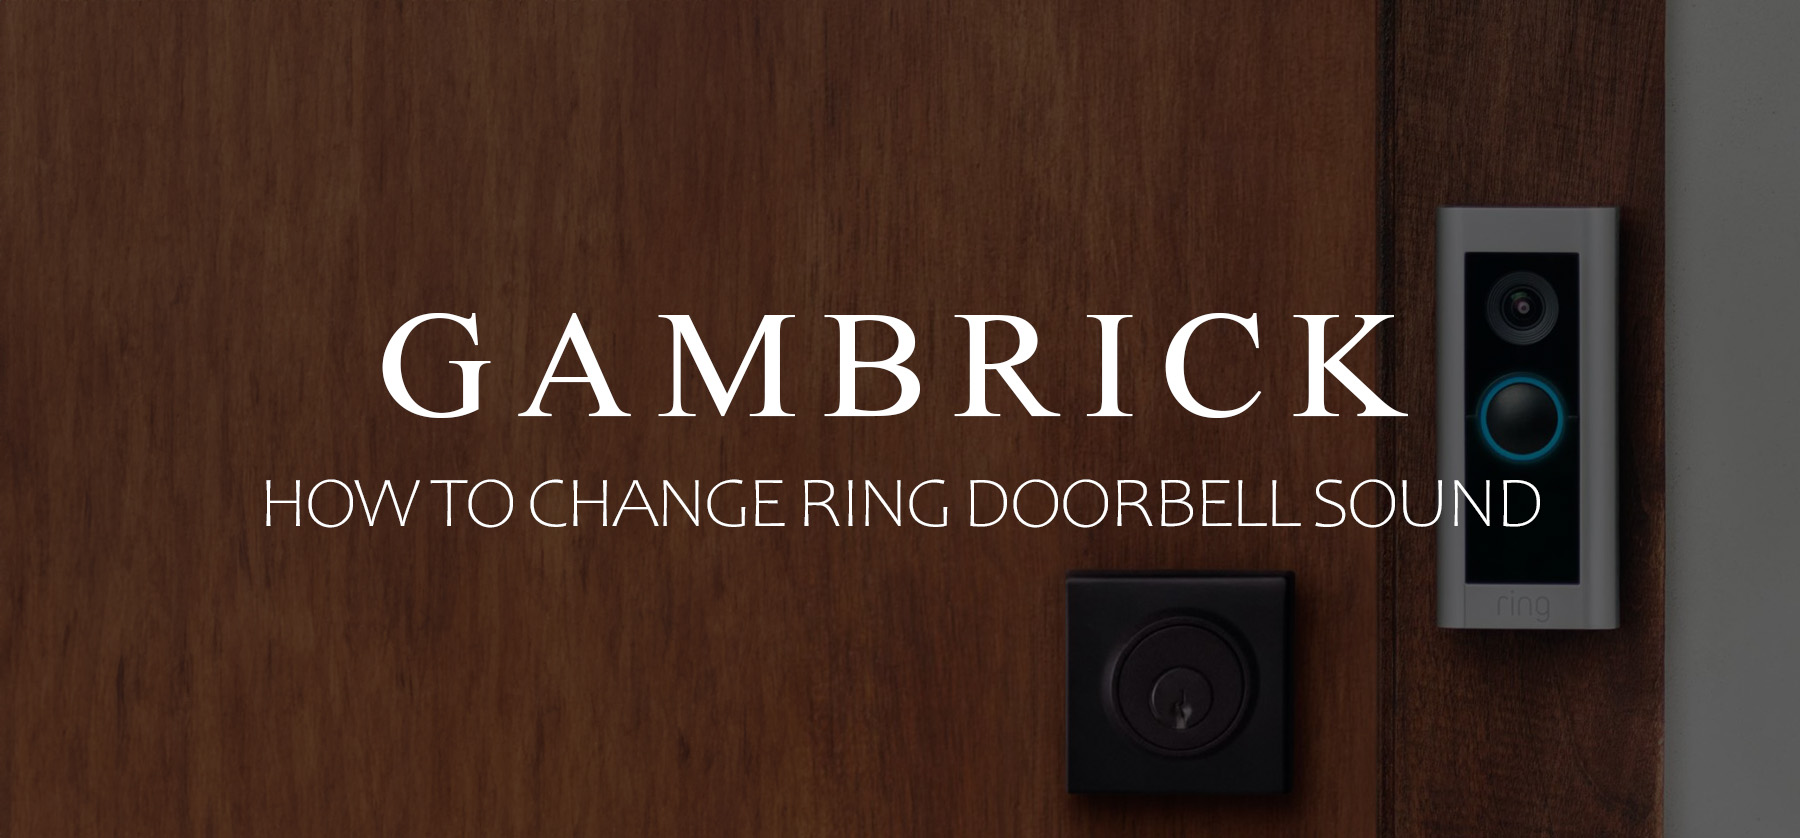 How To Change Ring Doorbell Sound banner 1.0